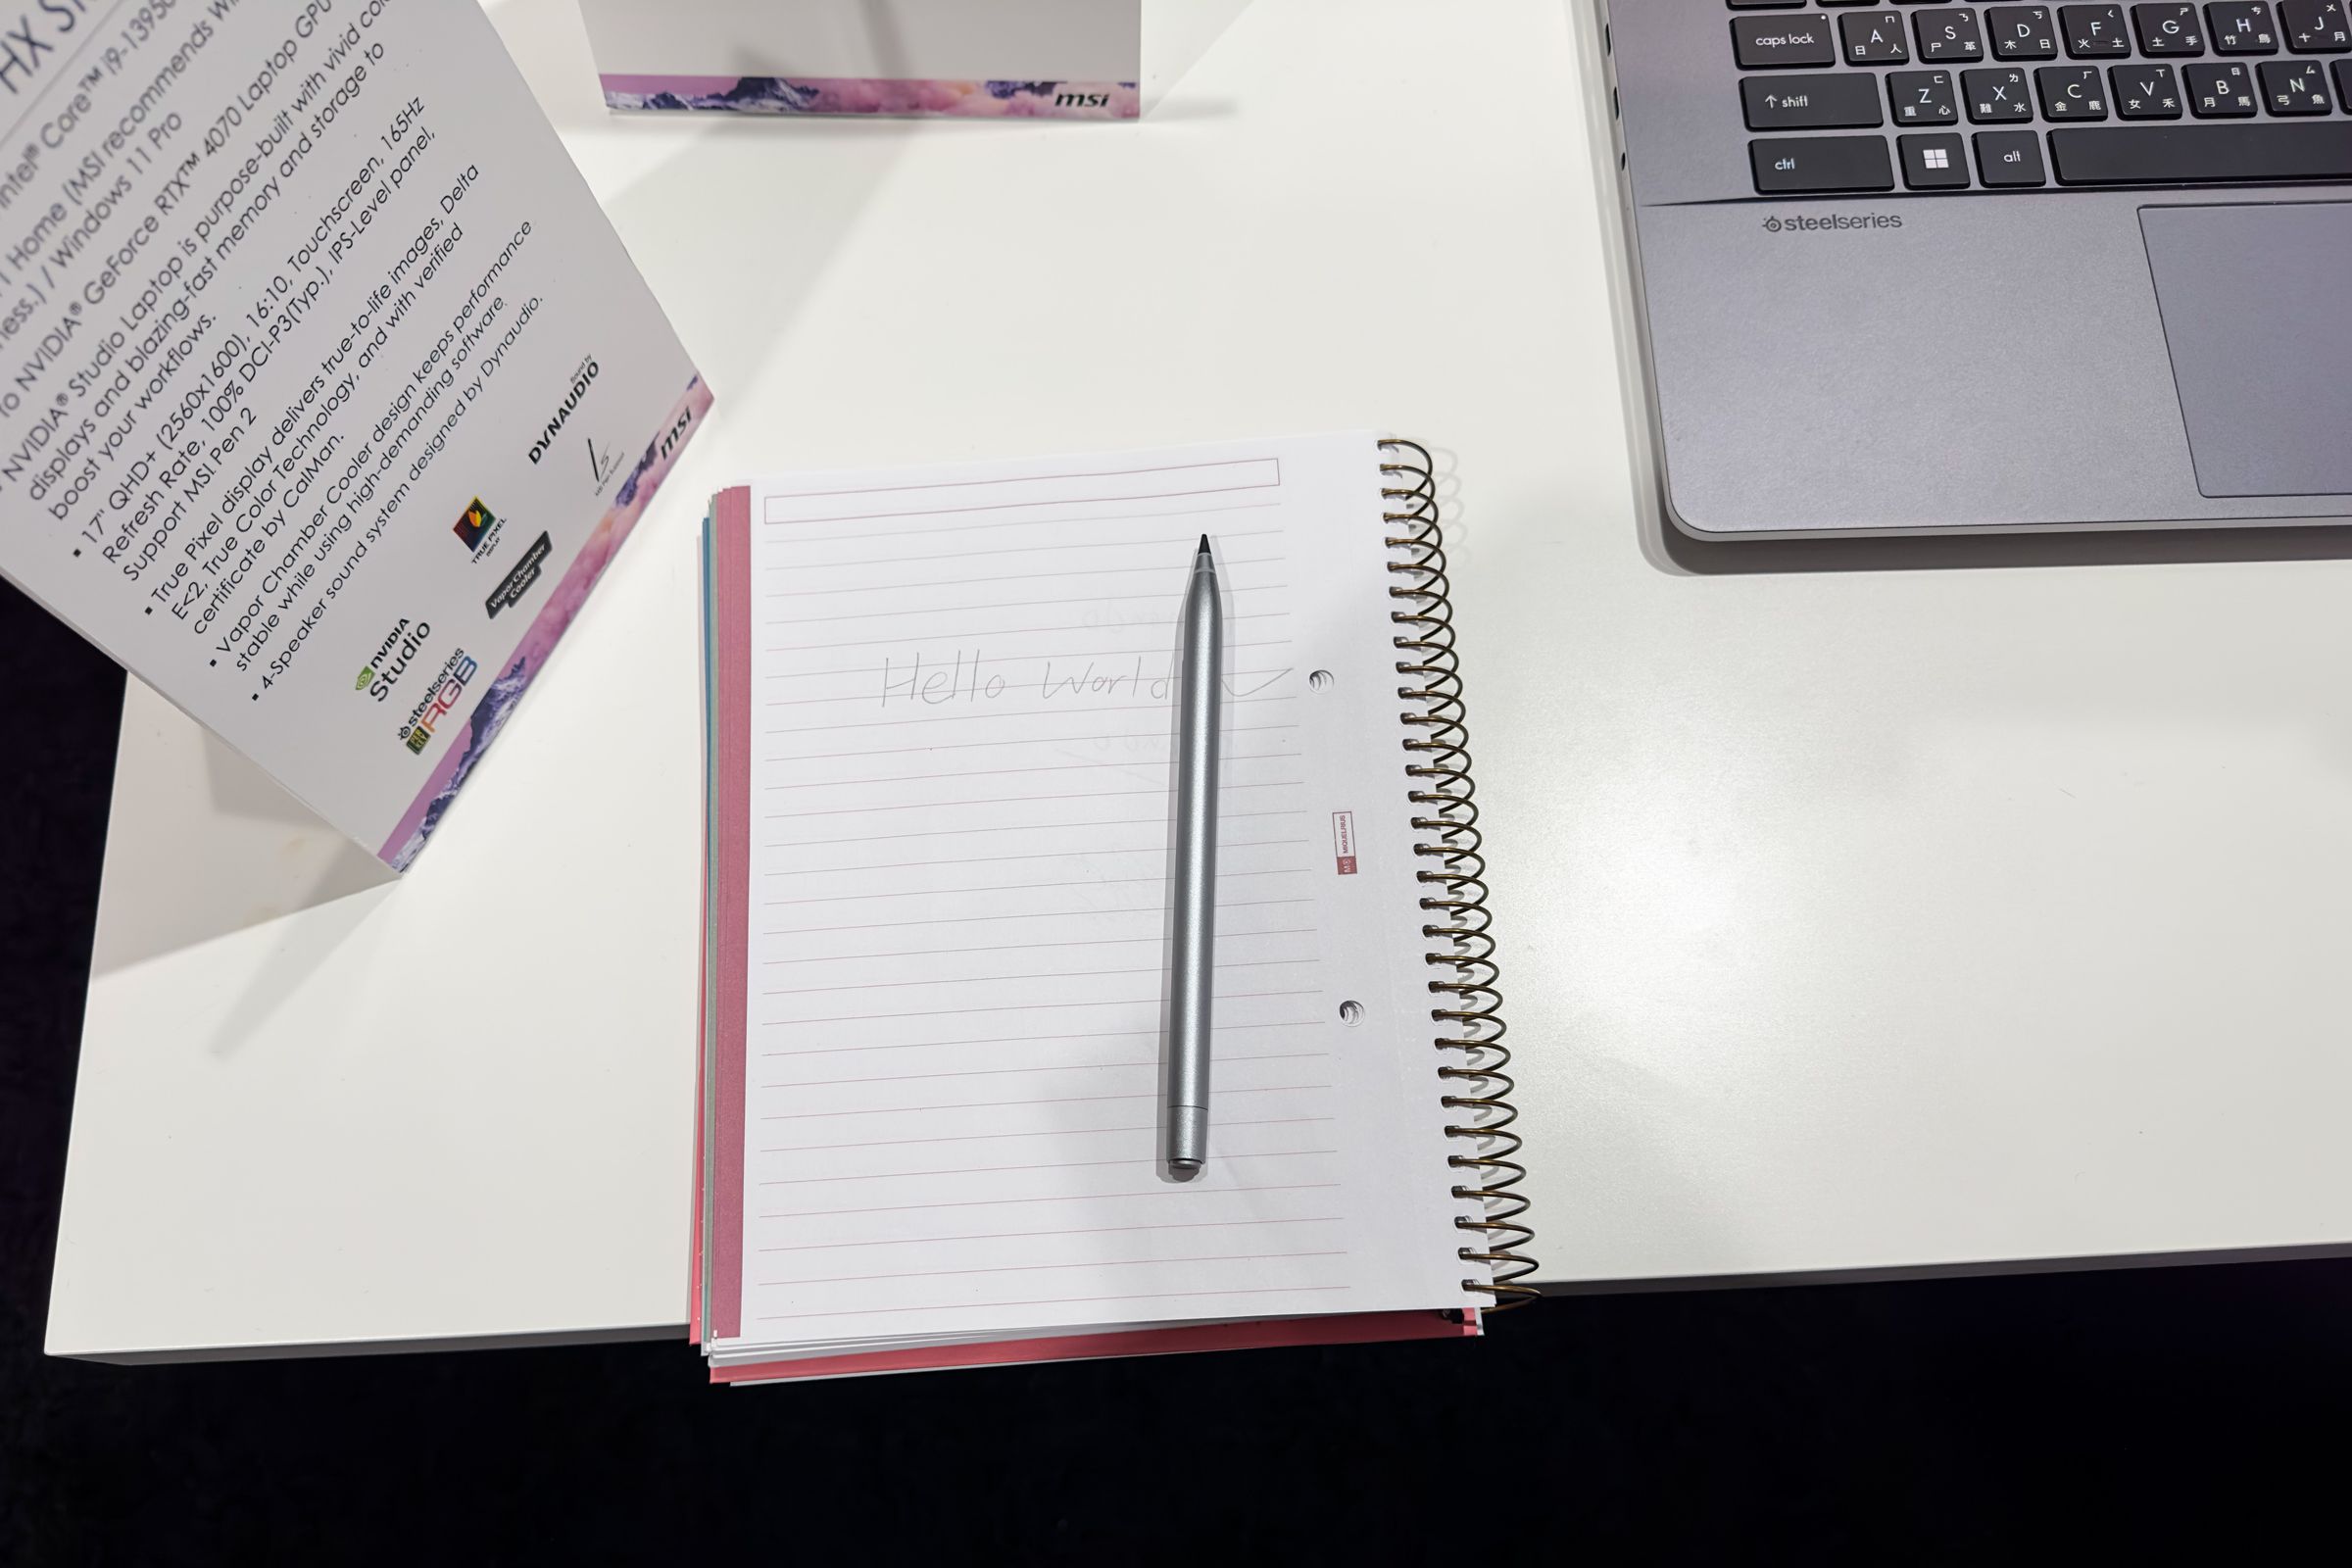 The MSI Pen 2 on top of a notebook.